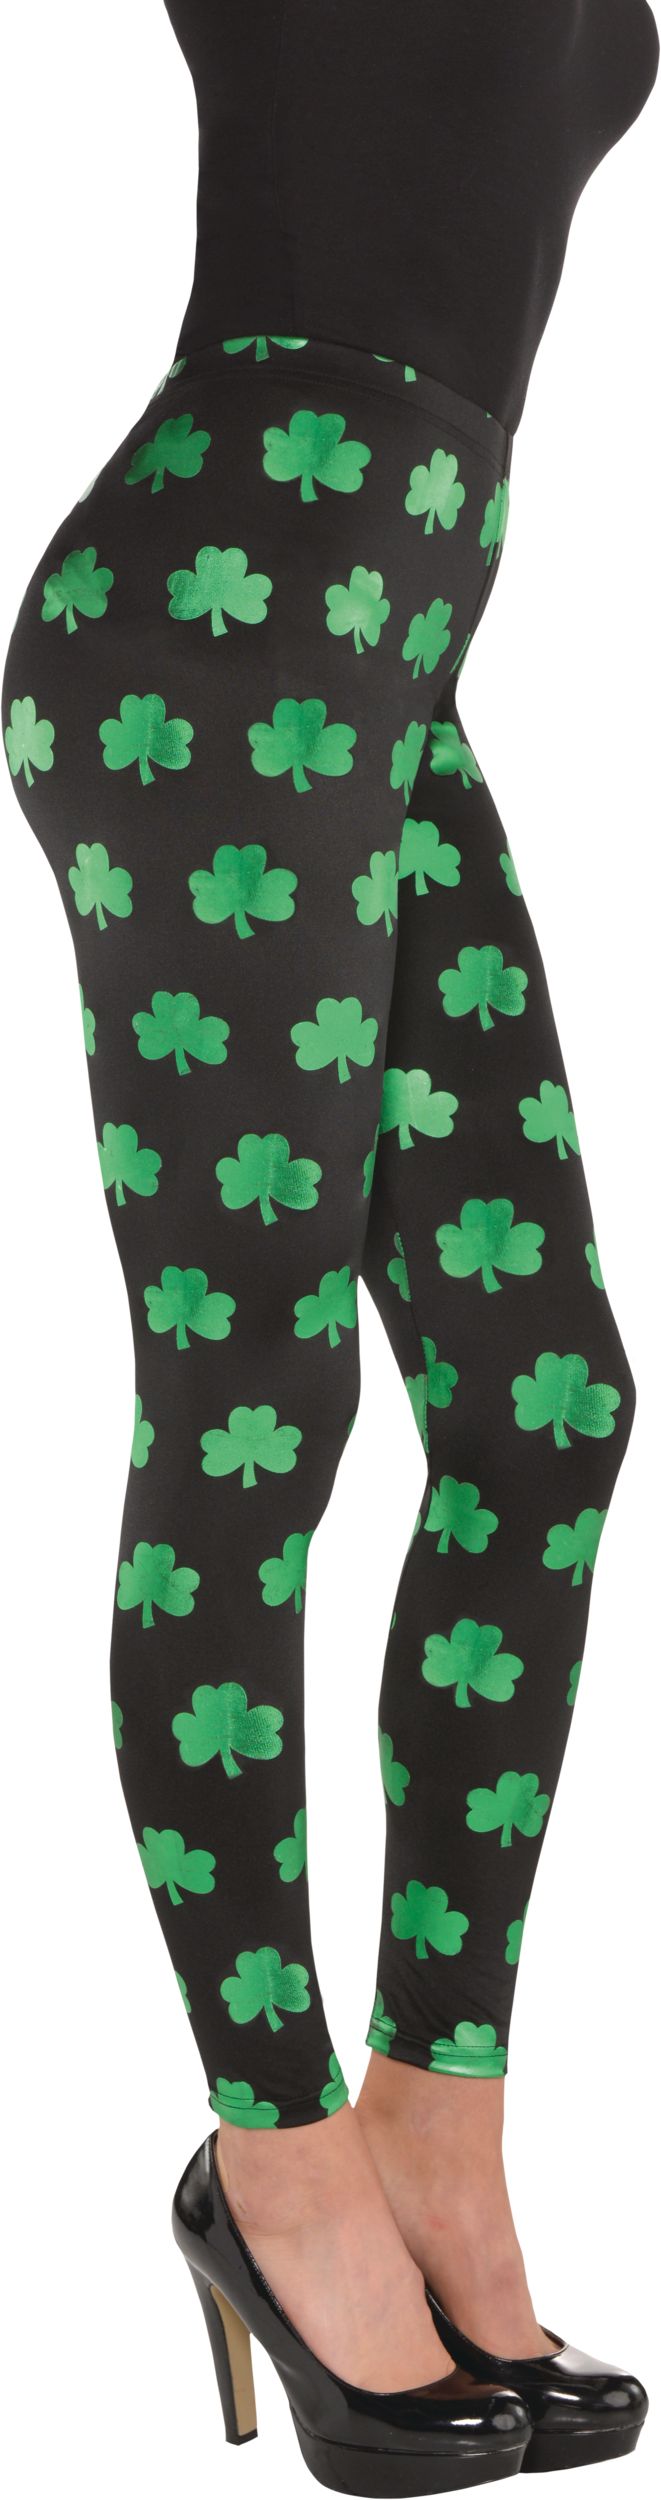 Aldi Is Selling Super-Soft, Supportive St. Paddy's Day Leggings for $4.99  and They're Guaranteed to Sell Out Fast, Parade